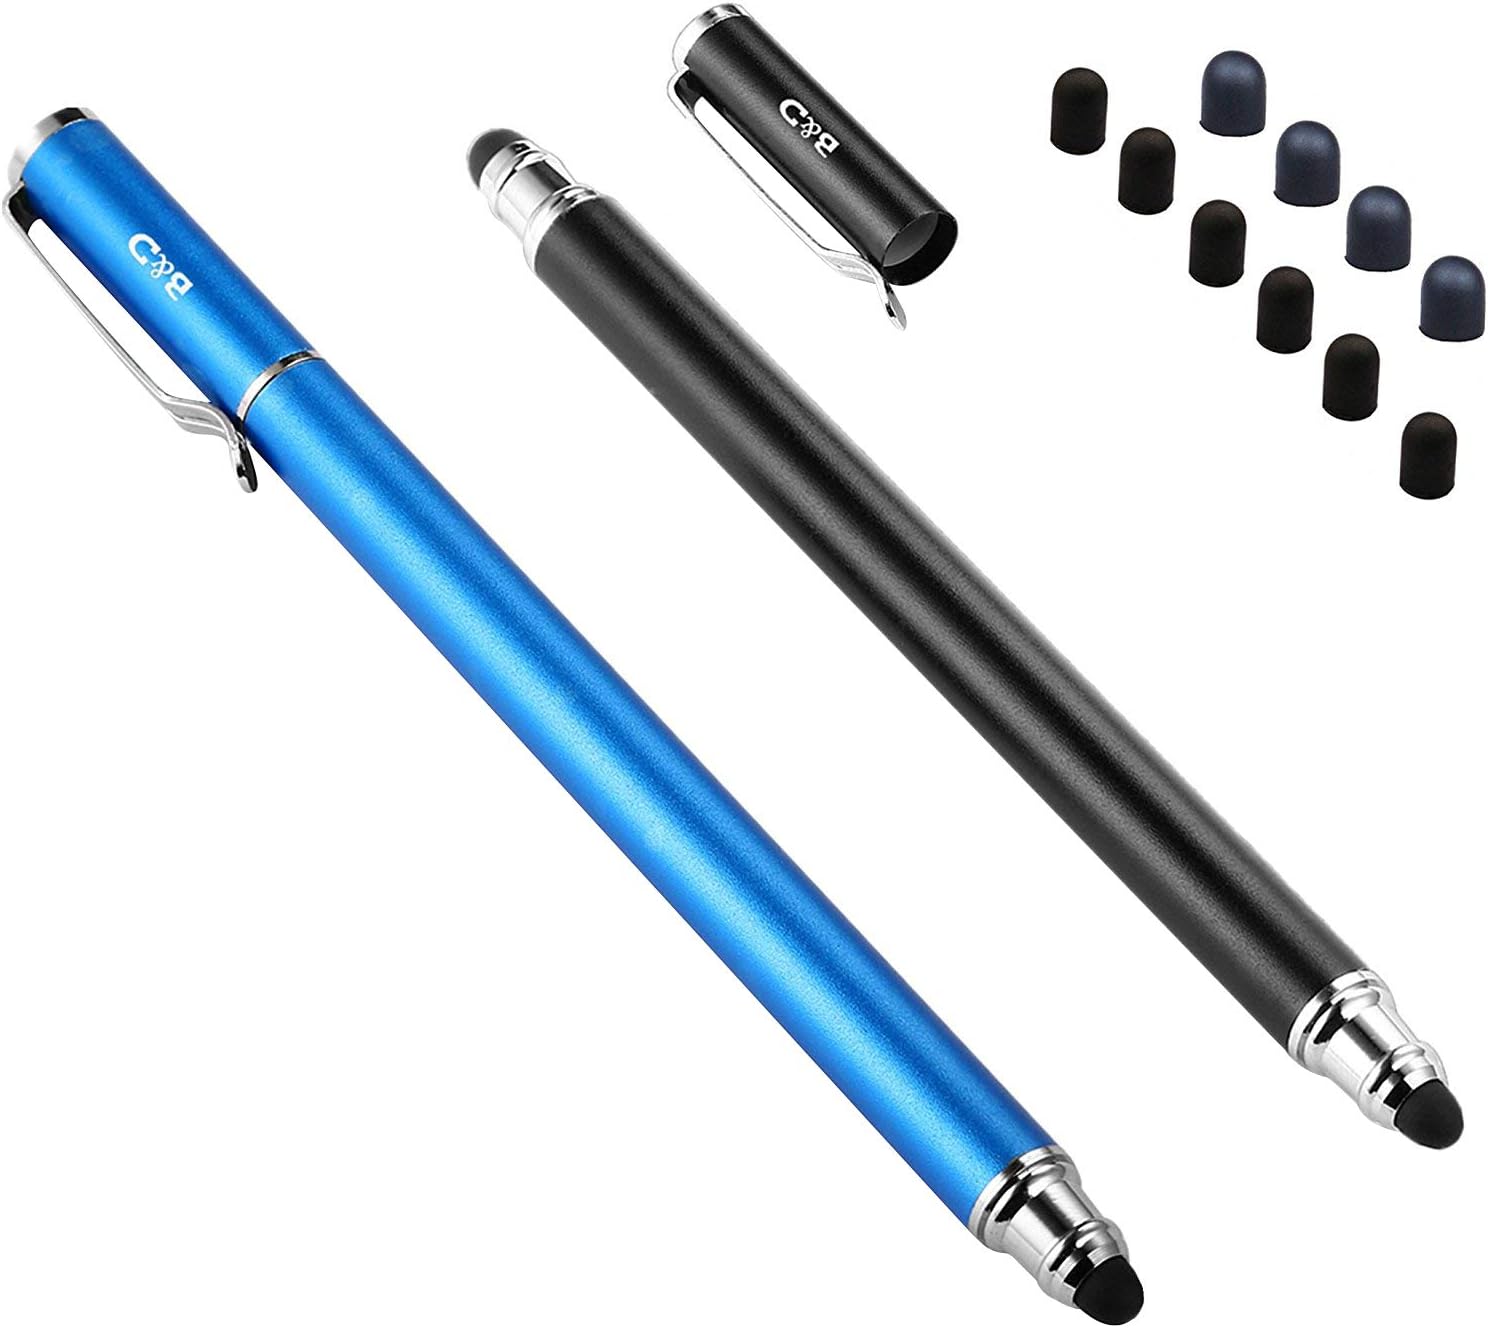 Bargains Depot (2 Pcs)[0.18-inch Fine Tip ] Stylus Touch Screen Pens 5.5 L Perfect for Drawing Writing Gaming Compatiable with Apple iPad iPhone Samsung Tablets and All Other Touch Screens